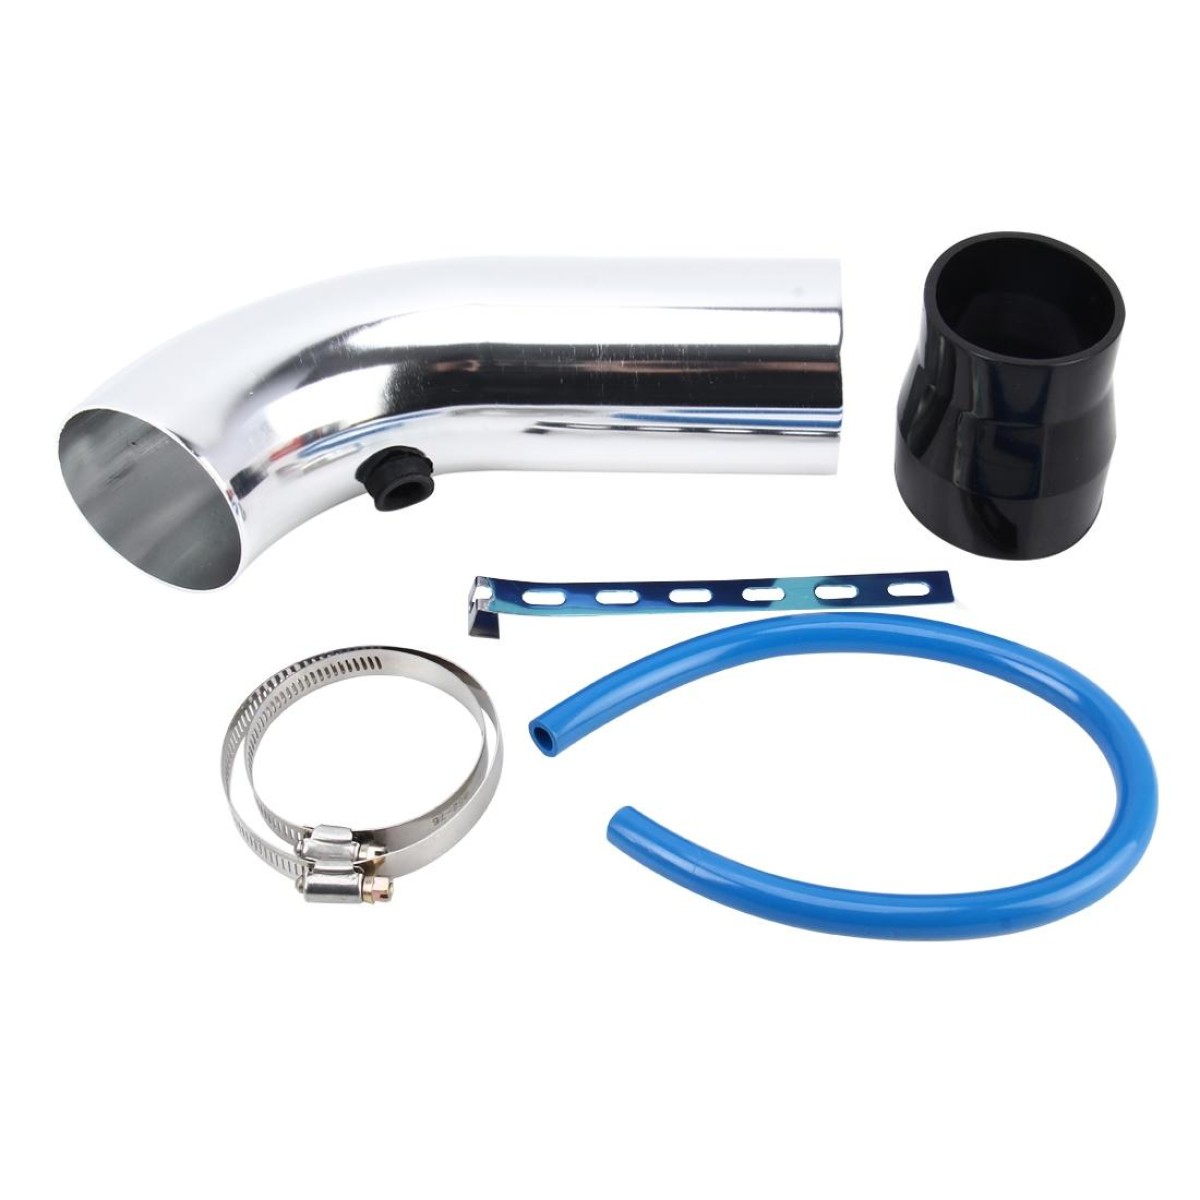 Universal  Air Intake Pipe Super Power Flow Air Intakes Short Cold Racing Aluminium Air Intake Pipe Hose with Cone Filter Kit System (Silver)